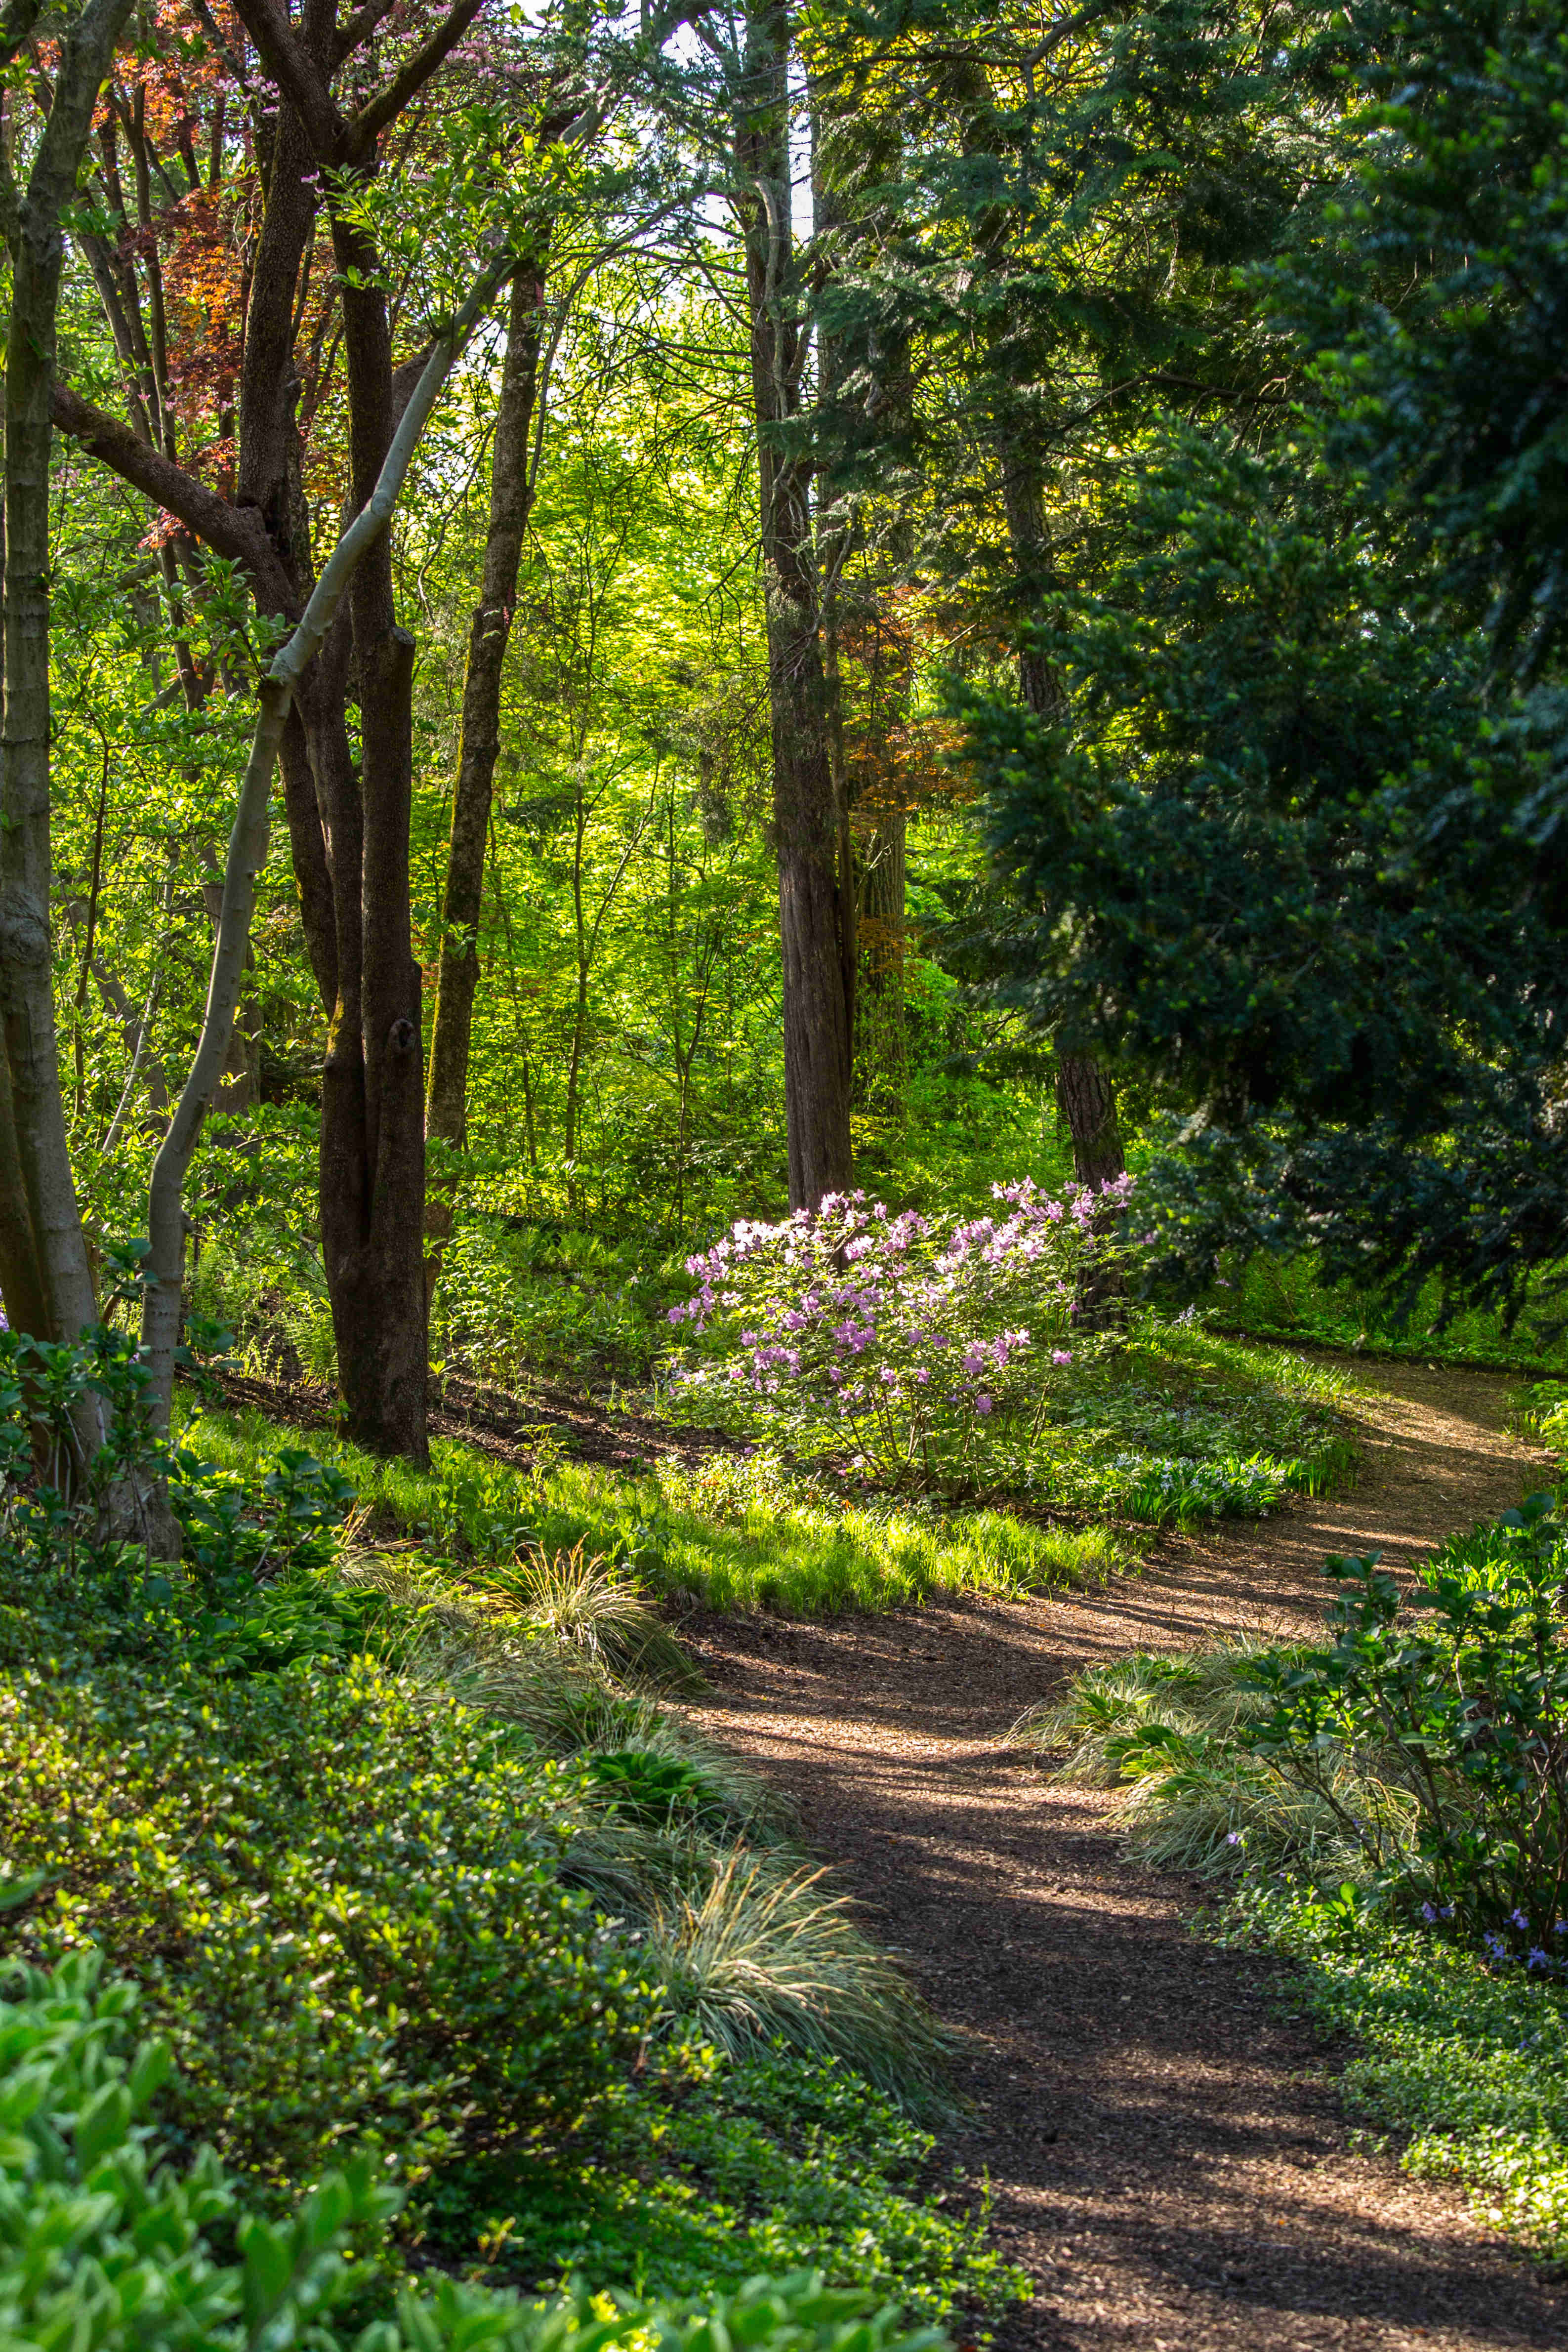 Woodland path surrounded by tall trees and green foliage